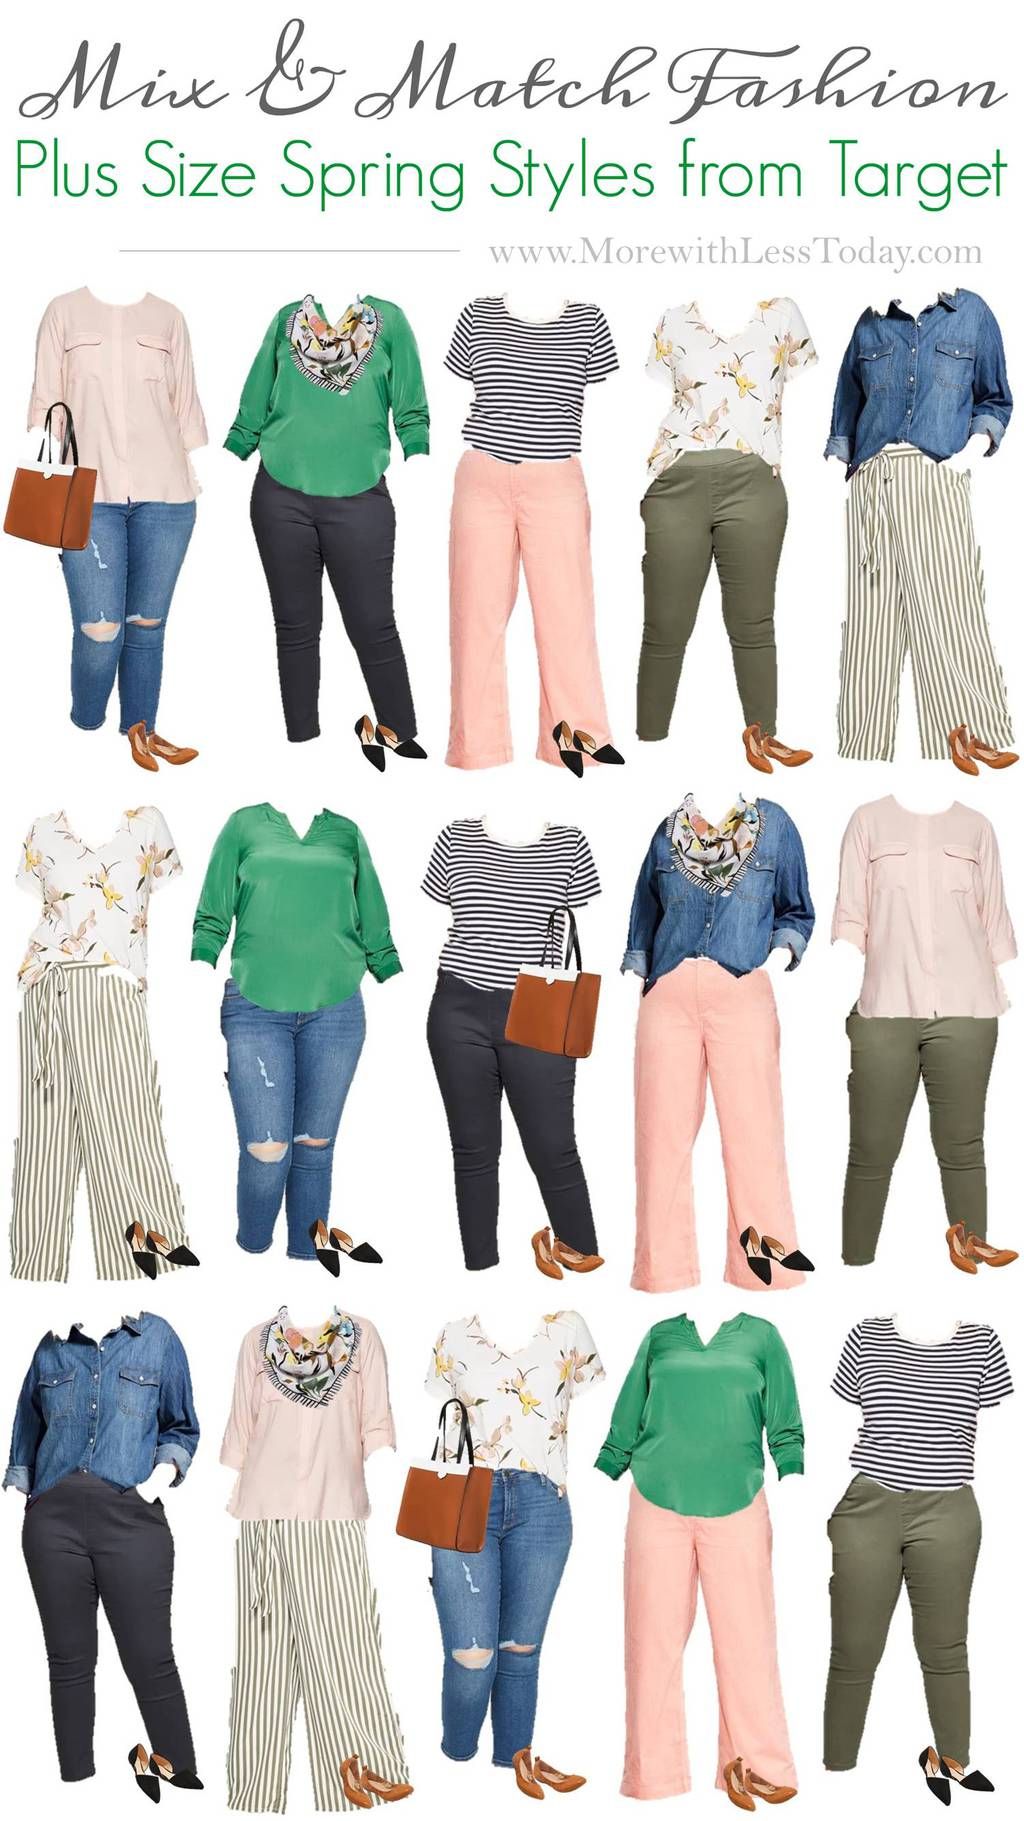 How to Create a Capsule Wardrobe with Target Plus Size Styles -